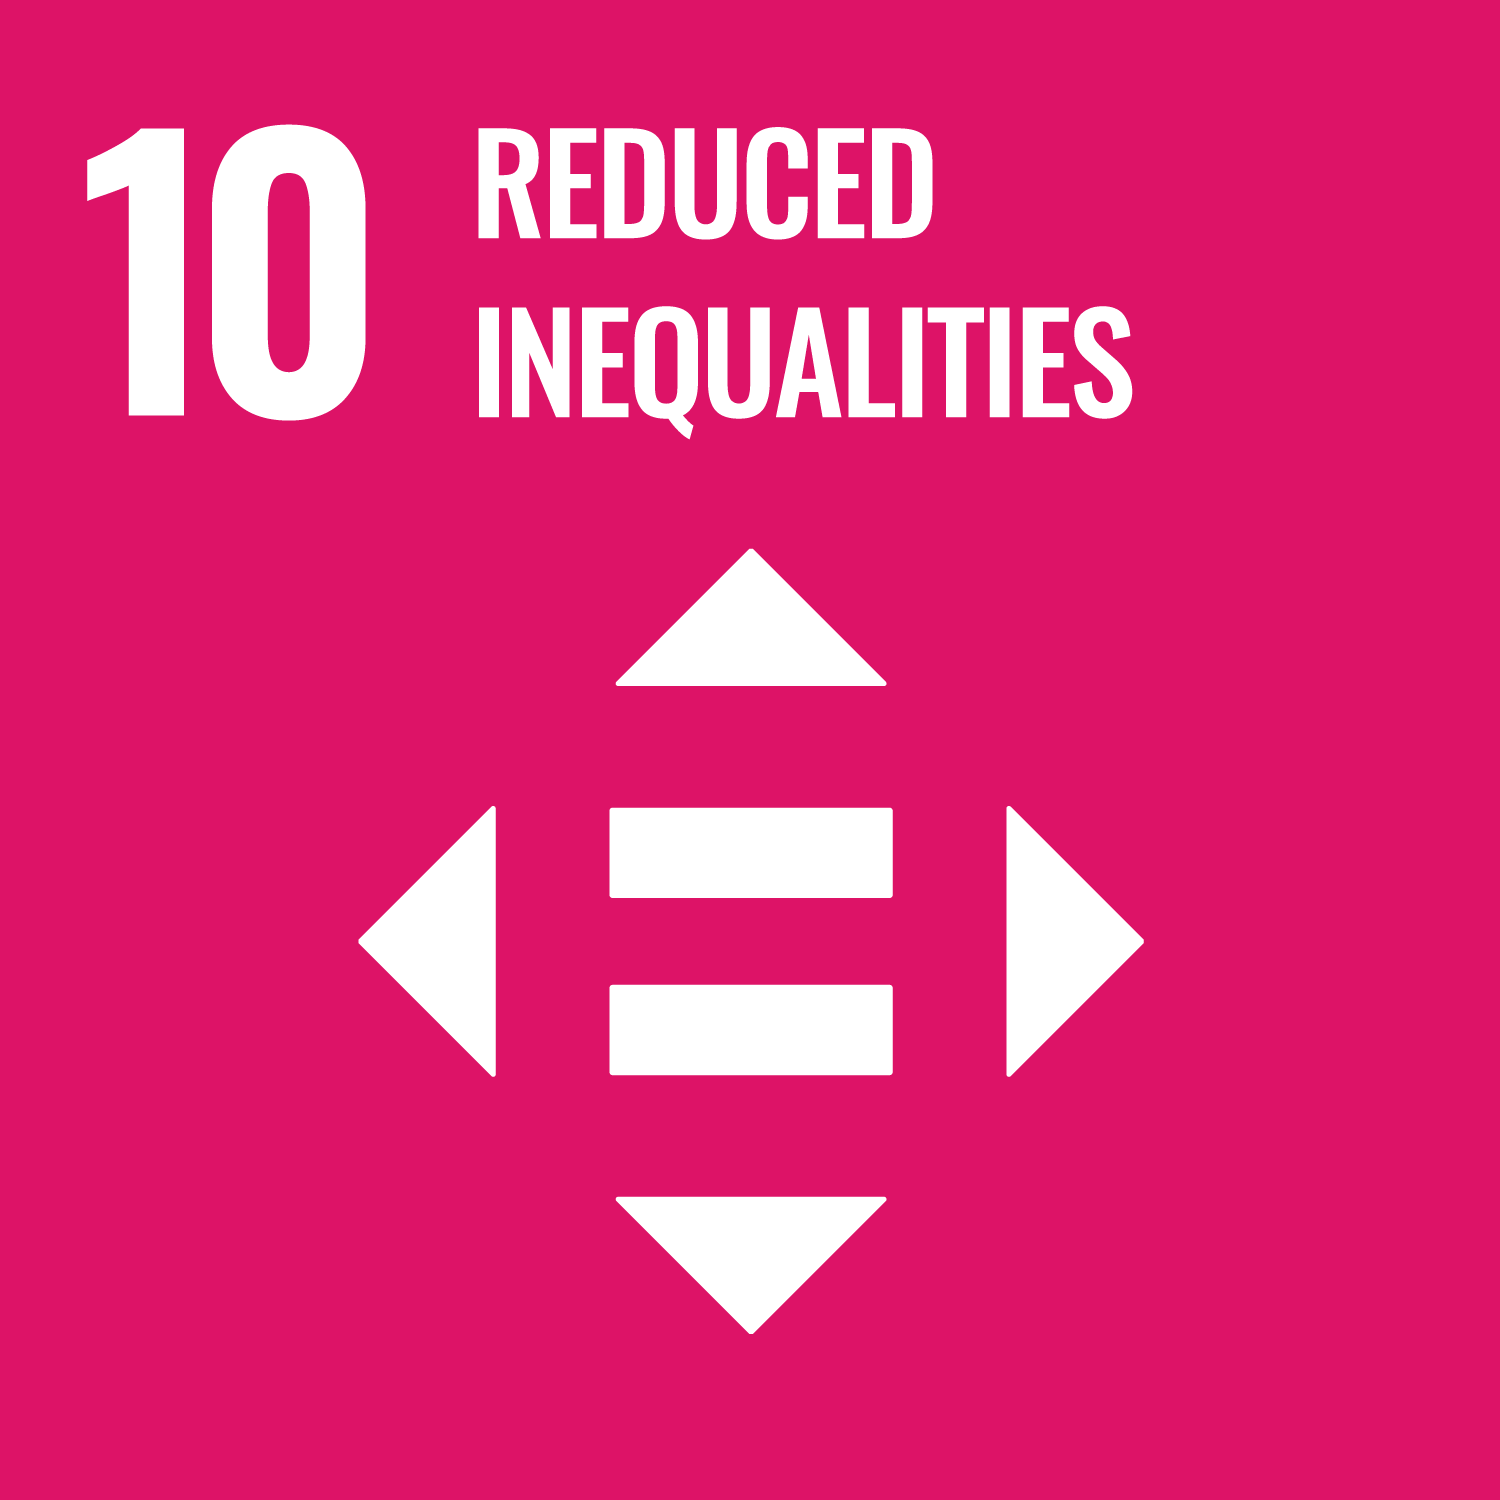 Goal 10: Reduced enequalities